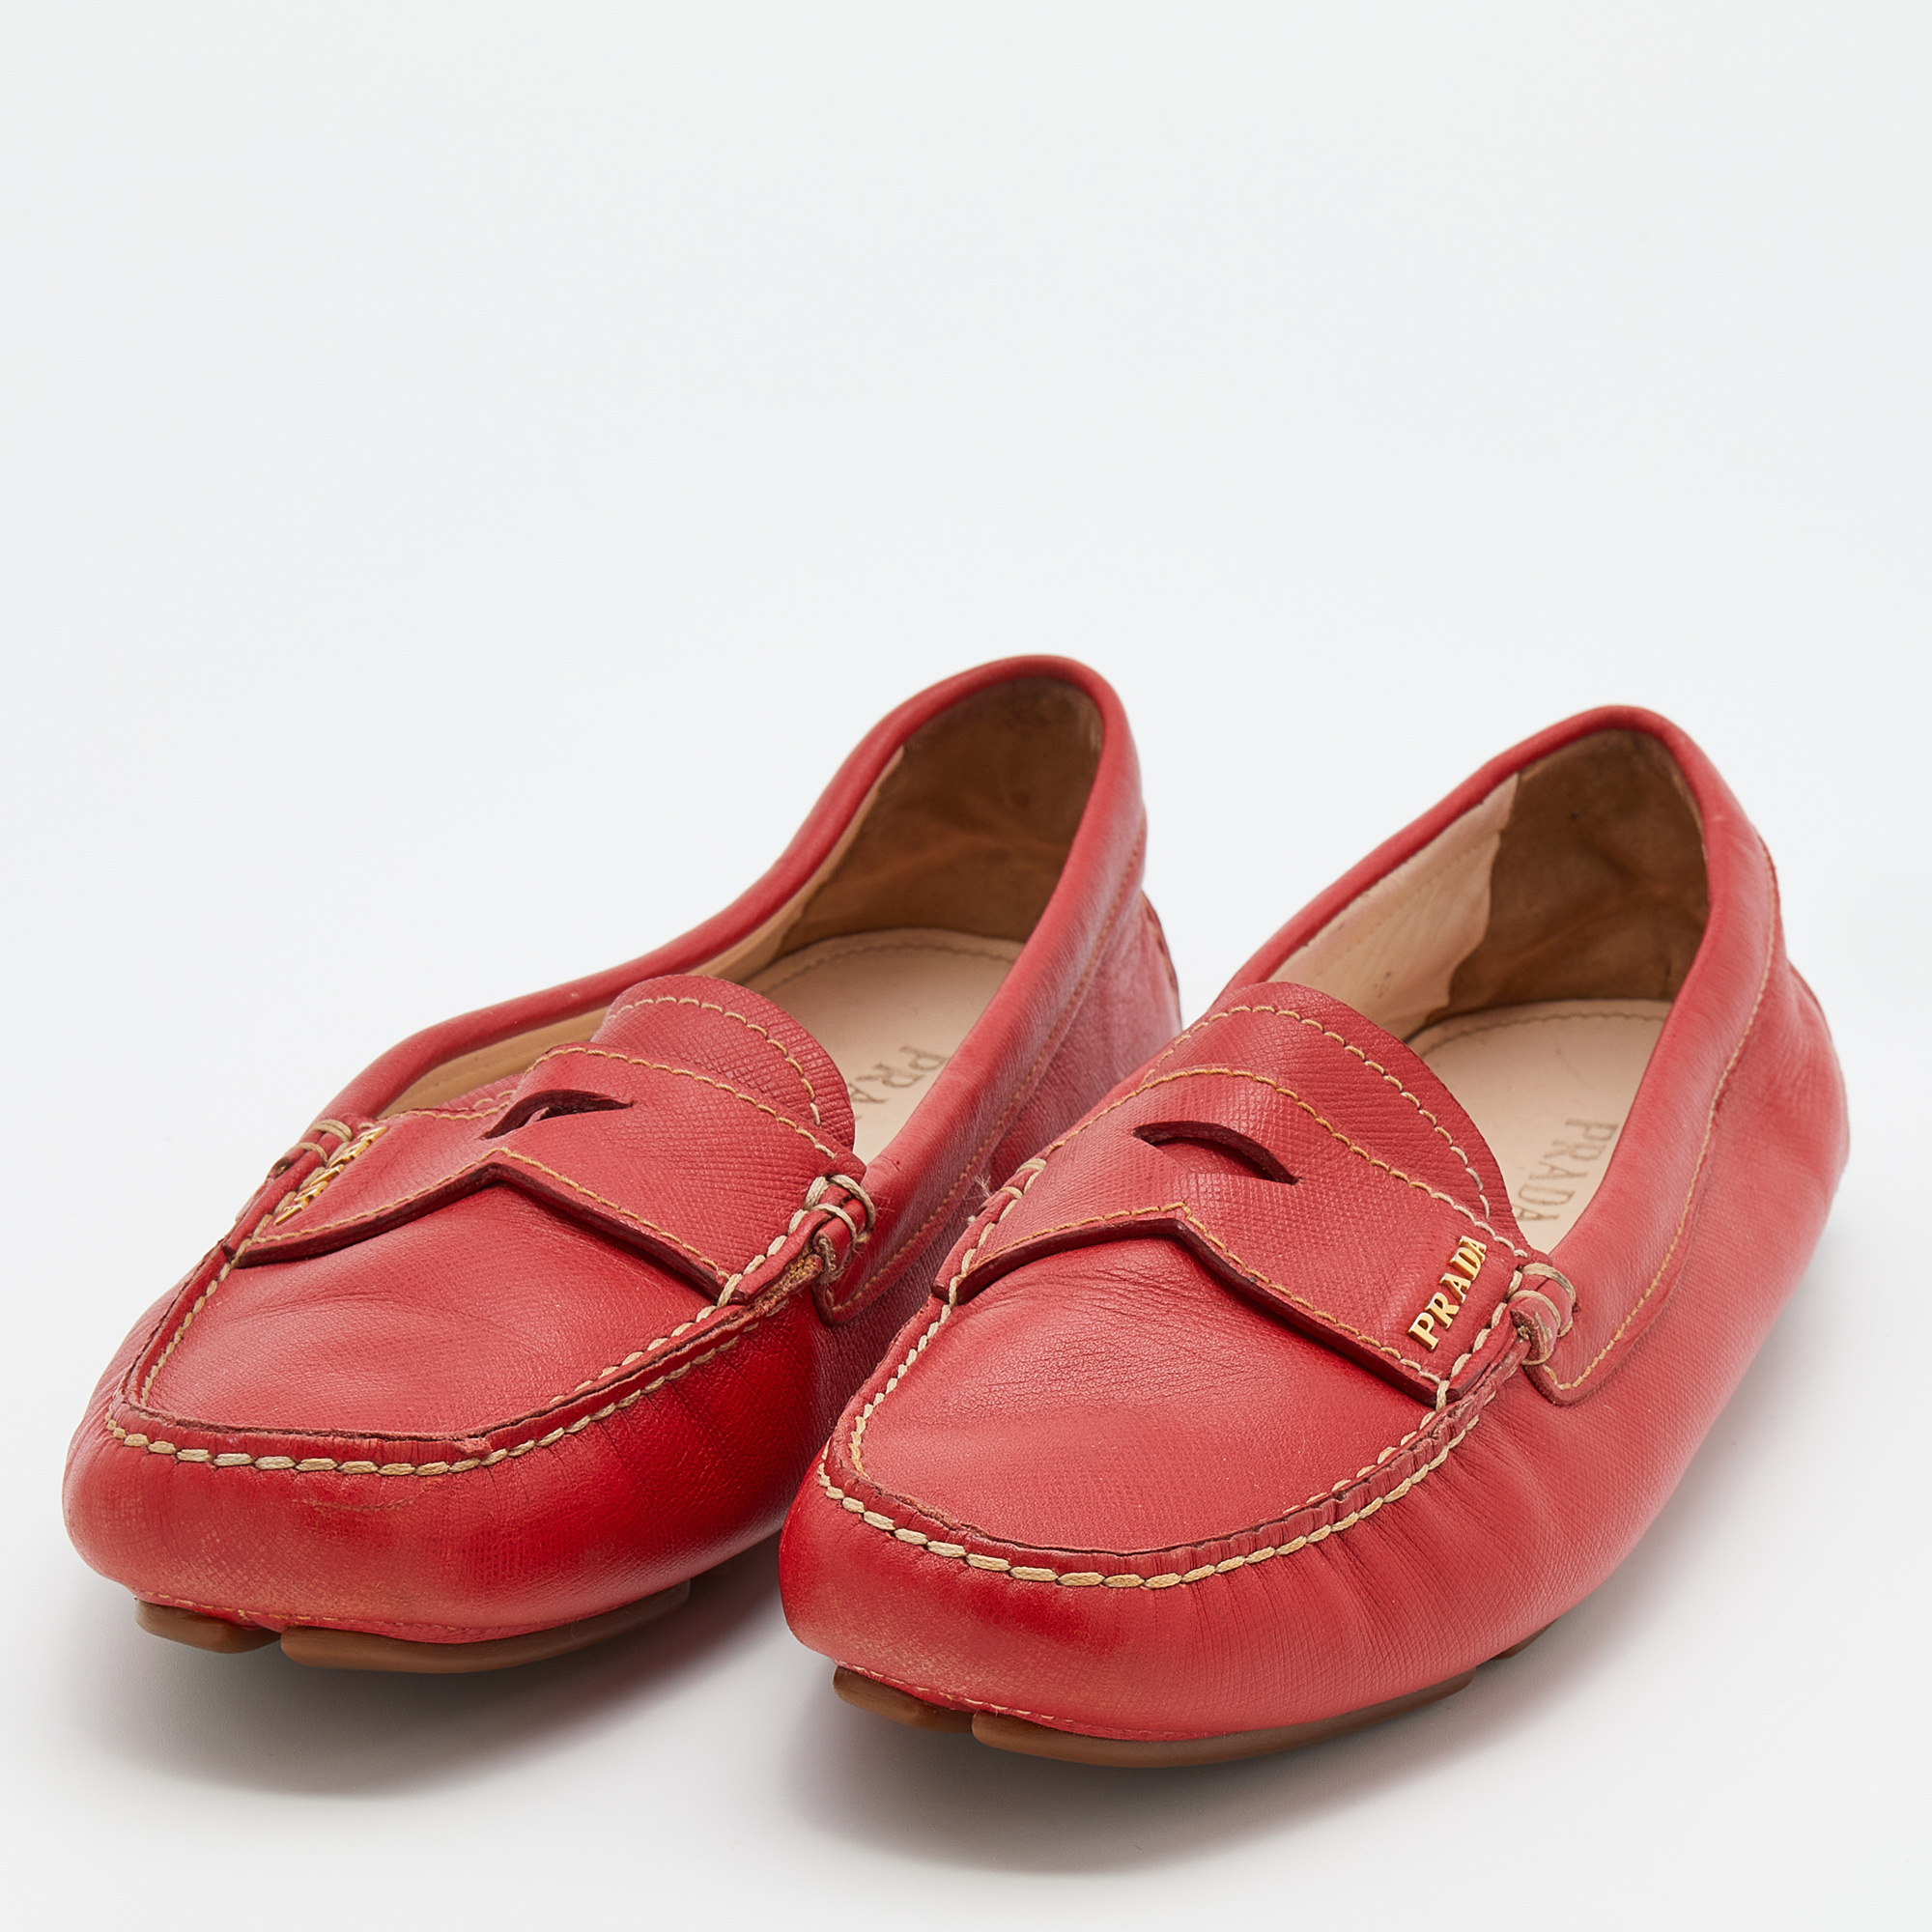 

Prada Red Leather Penny Slip On Loafers Size